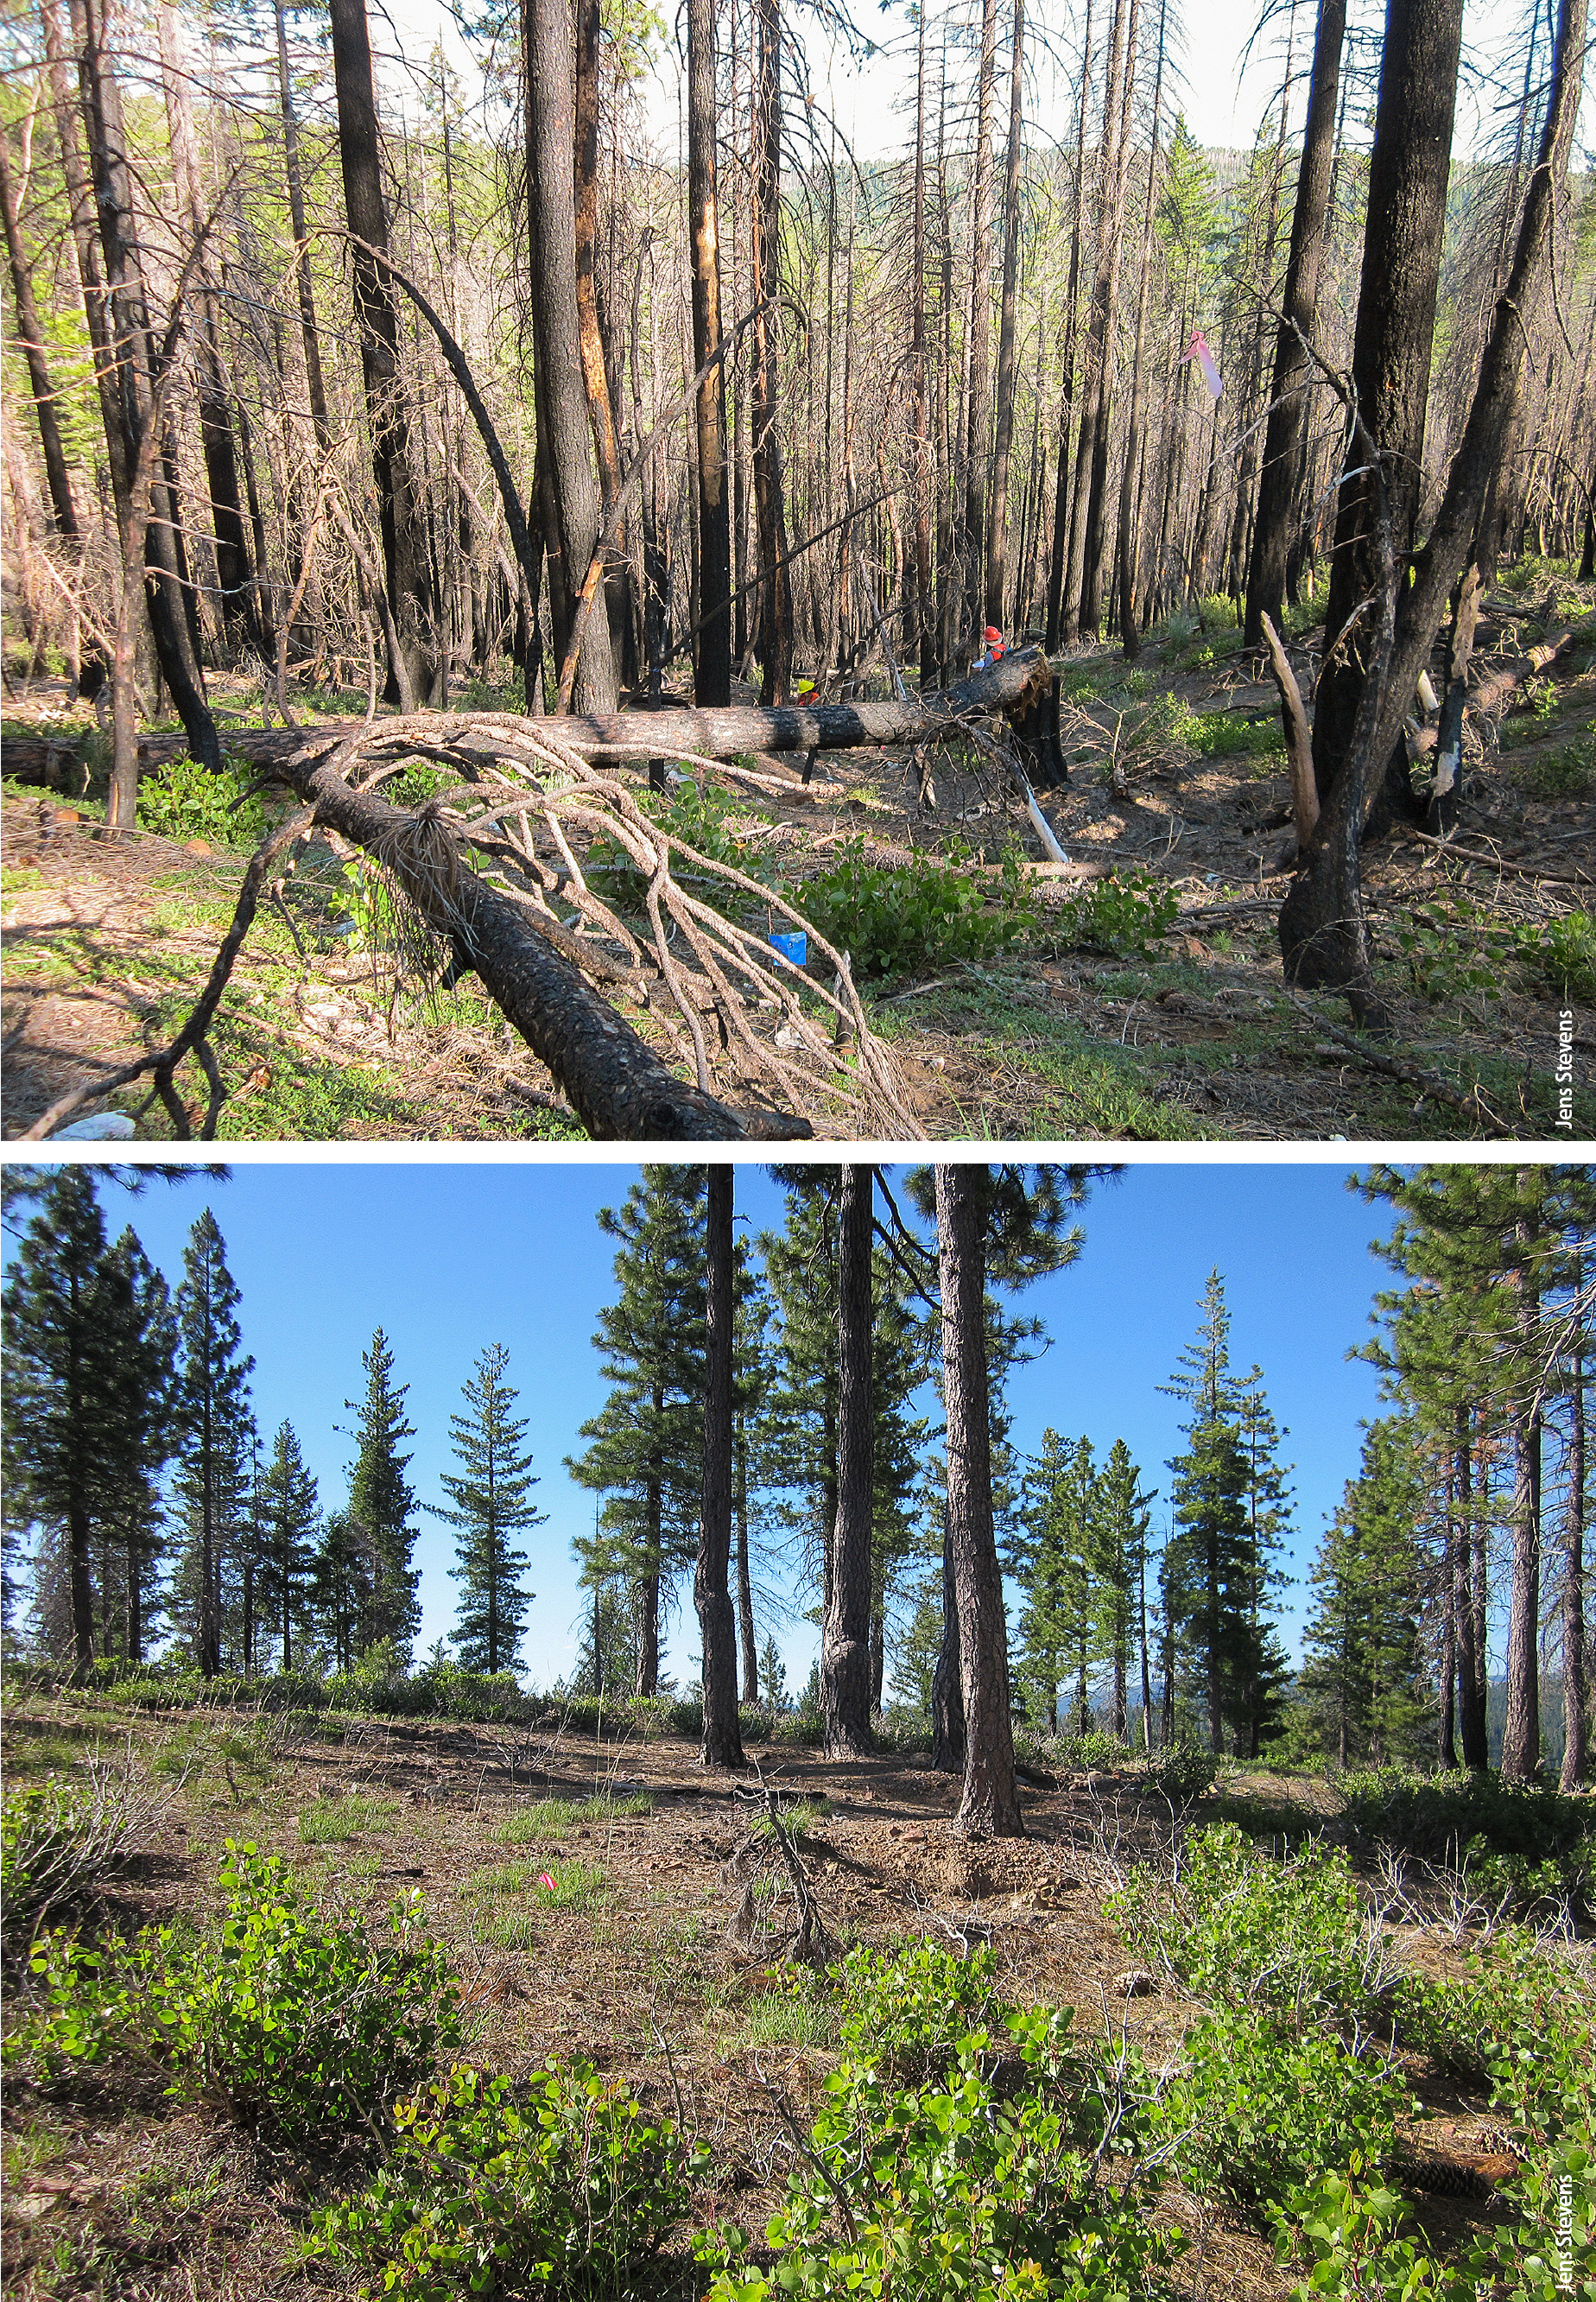 These 2011 photographs illustrate the effect of a fuels treatment implemented prior to the 2008 American River Complex fire in Placer County. Nearly all the trees in the treated stand, bottom, survived the fire, while many trees in the denser, untreated stand, top, did not.